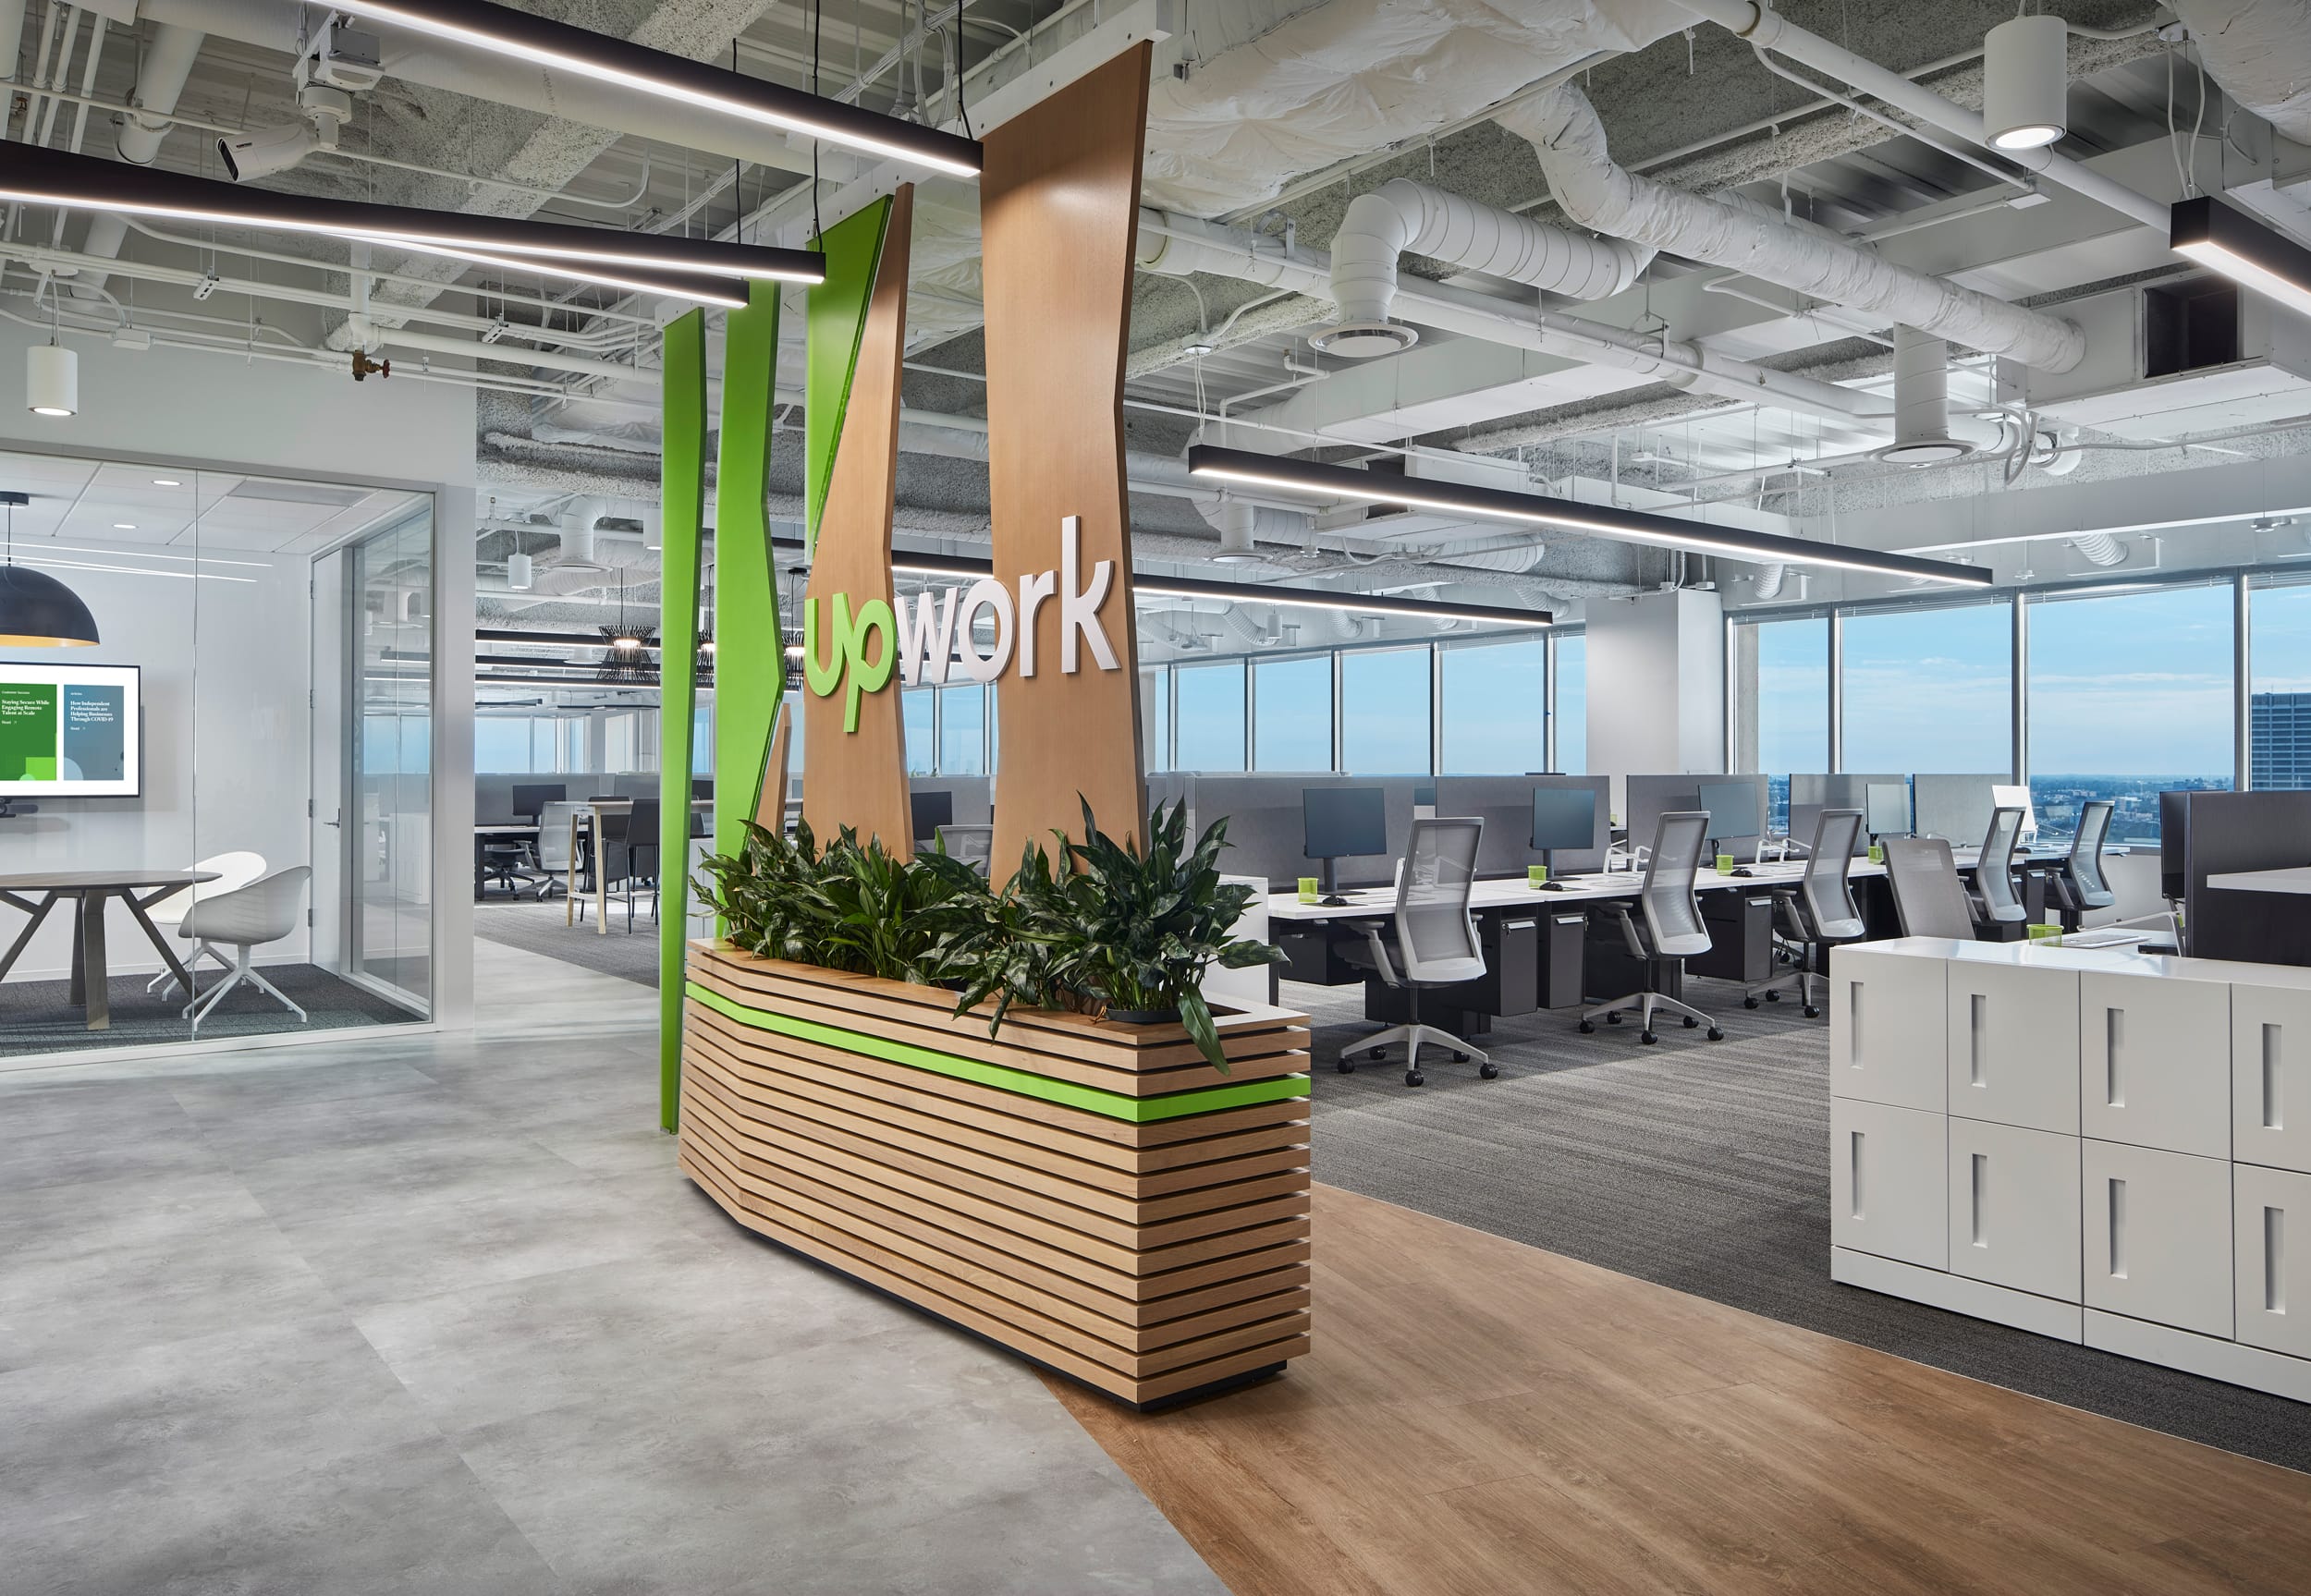 Skender Completes Interior Construction to Expand Upwork’s Chicago Office